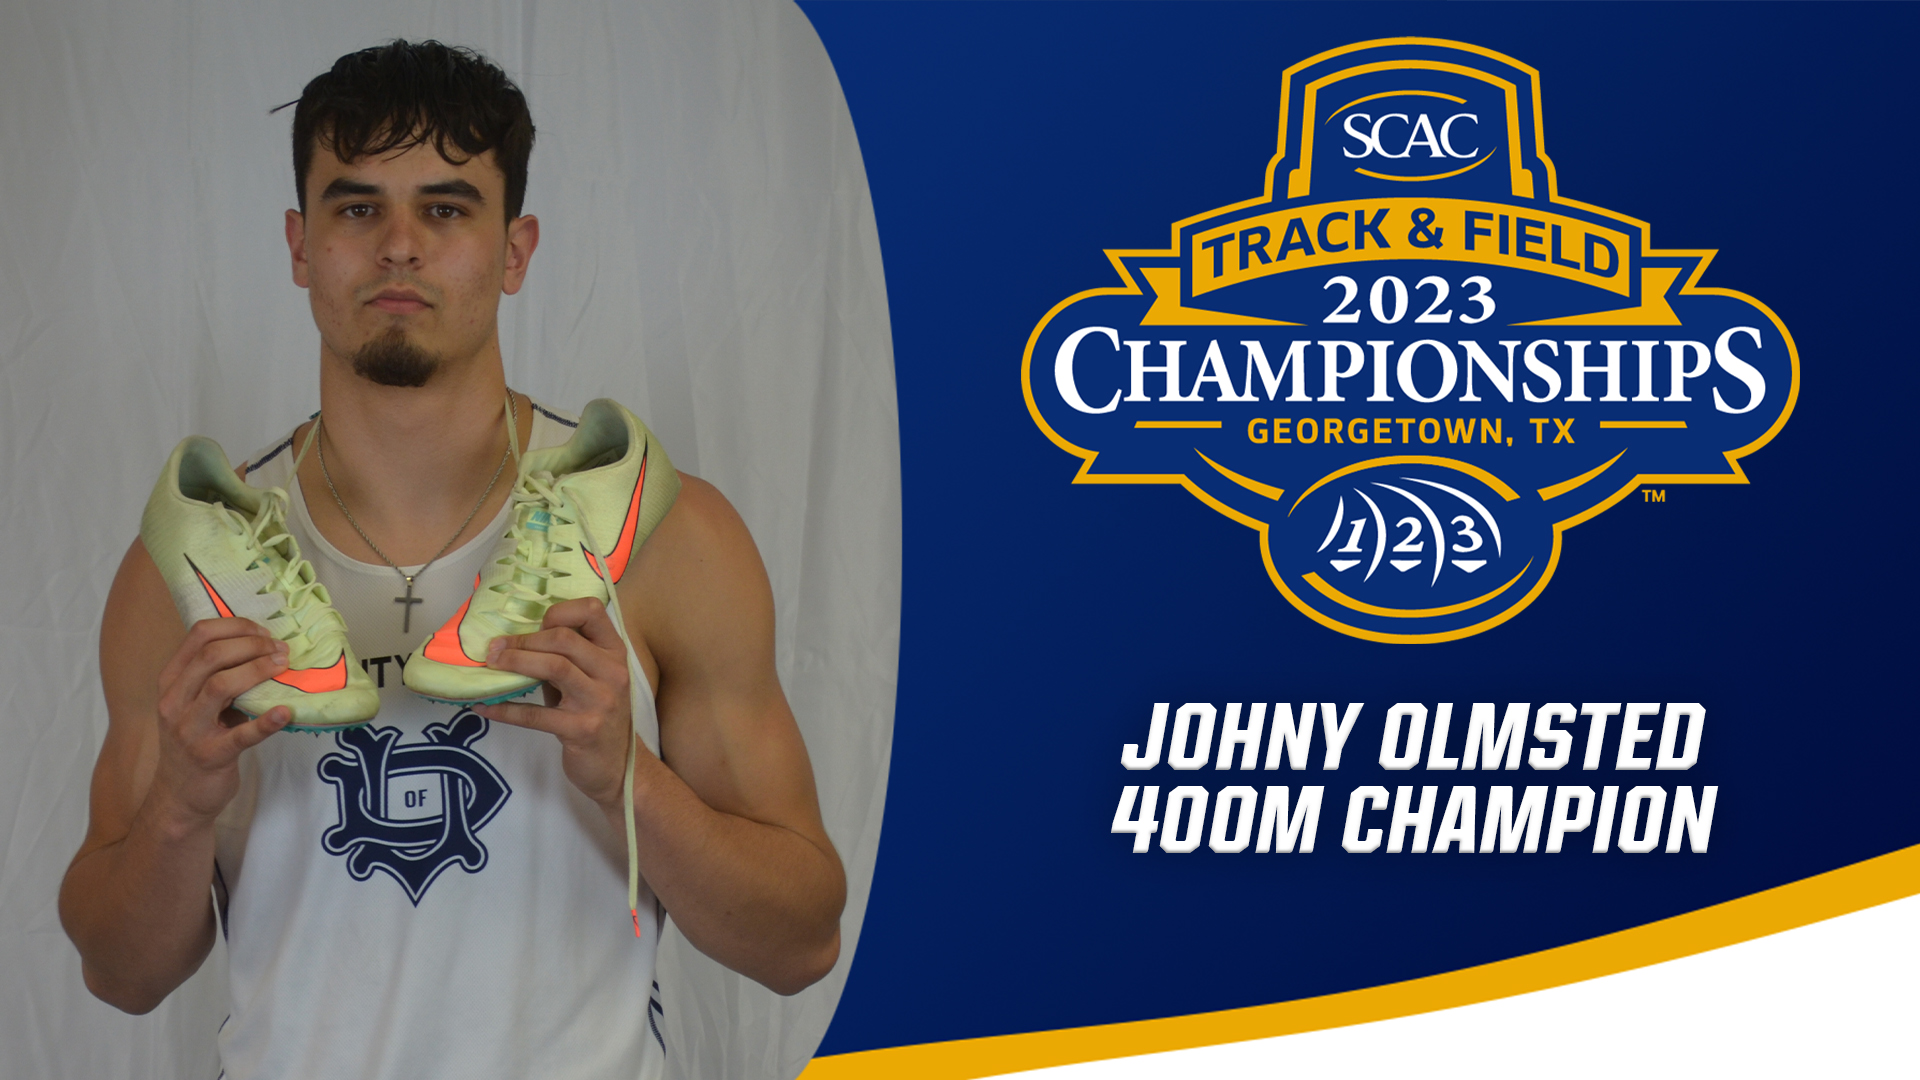 Crusaders Finish Strong, Olmsted Claims 400m Title at SCAC Championship